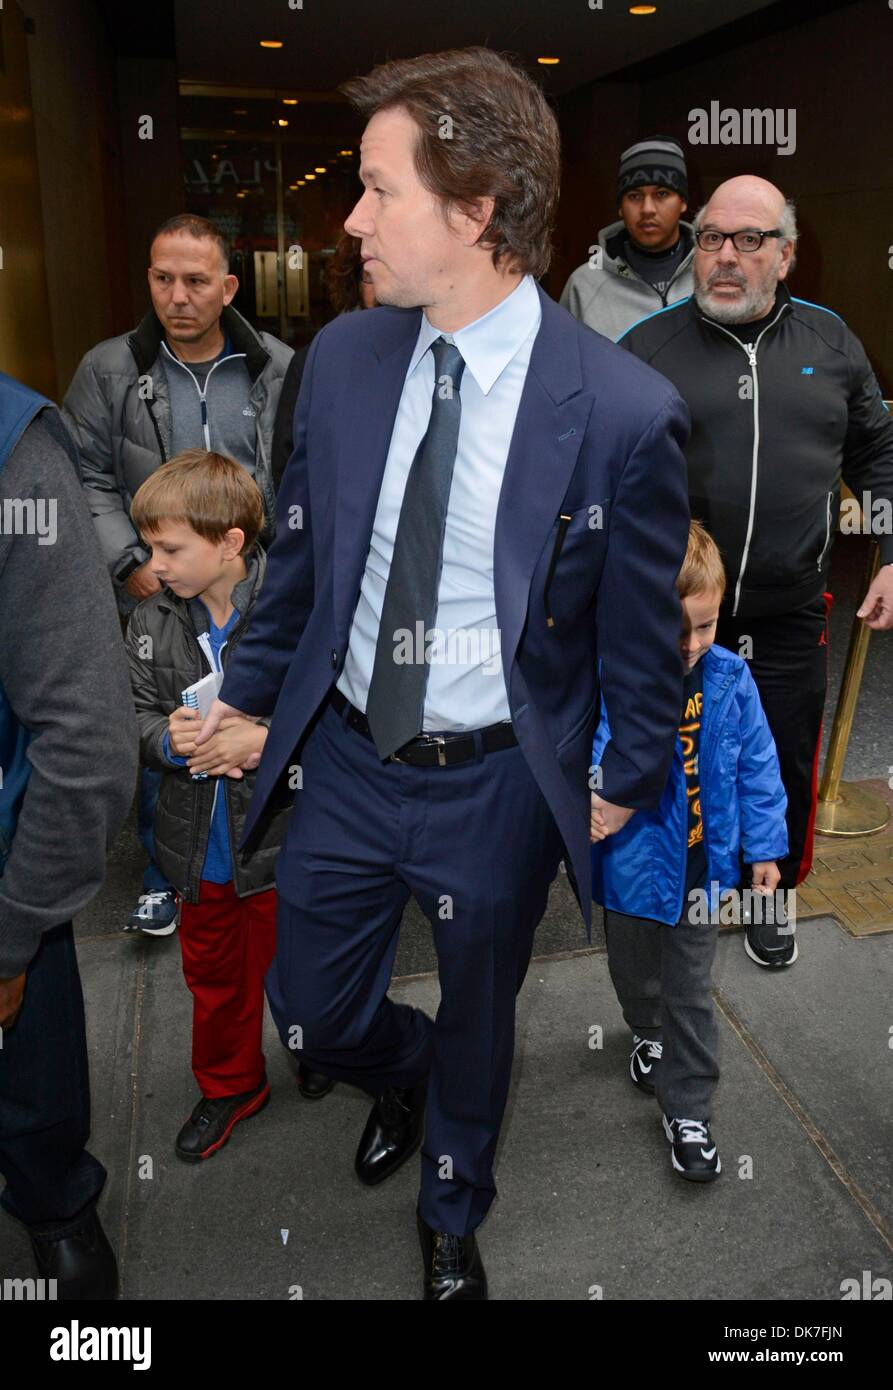 New York, NY, USA. 3rd Dec, 2013. Mark Wahlberg, sons Michael Wahlberg, Brendan Joseph Wahlberg at Today Show out and about for Celebrity Candids - TUE, New York, NY December 3, 2013. Credit:  Derek Storm/Everett Collection/Alamy Live News Stock Photo